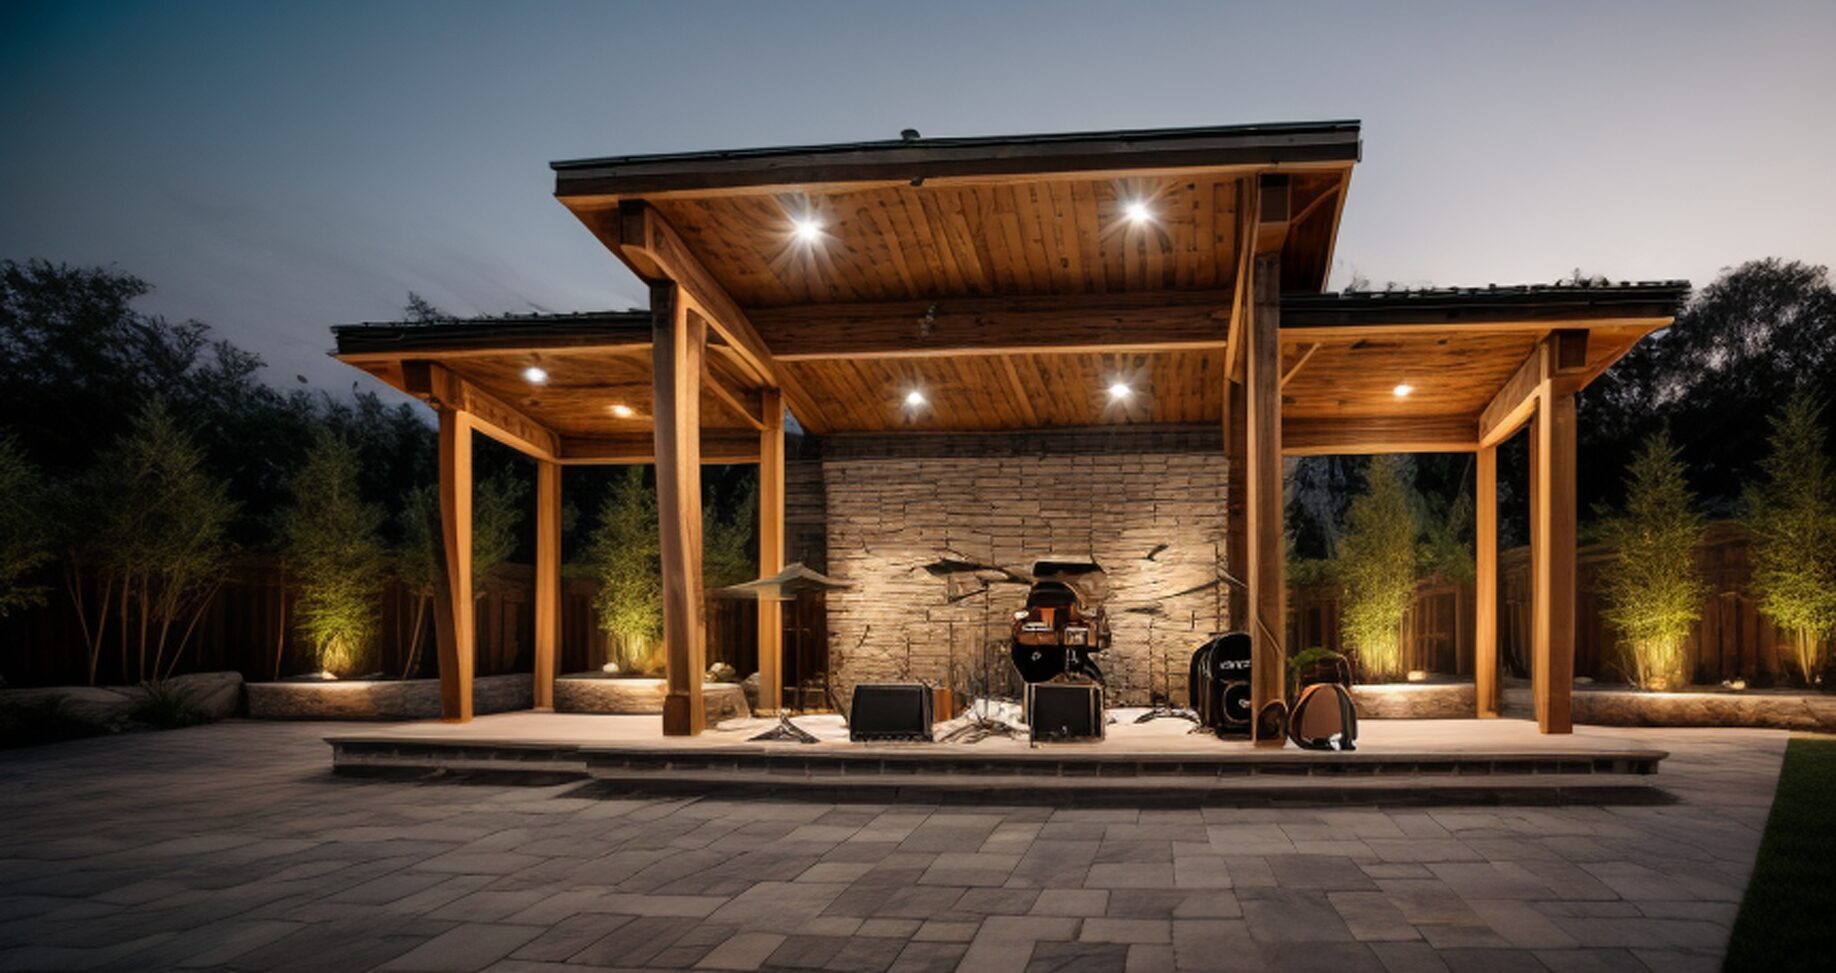 Outdoor stage set up with musical instruments at night, illuminated by overhead lighting.